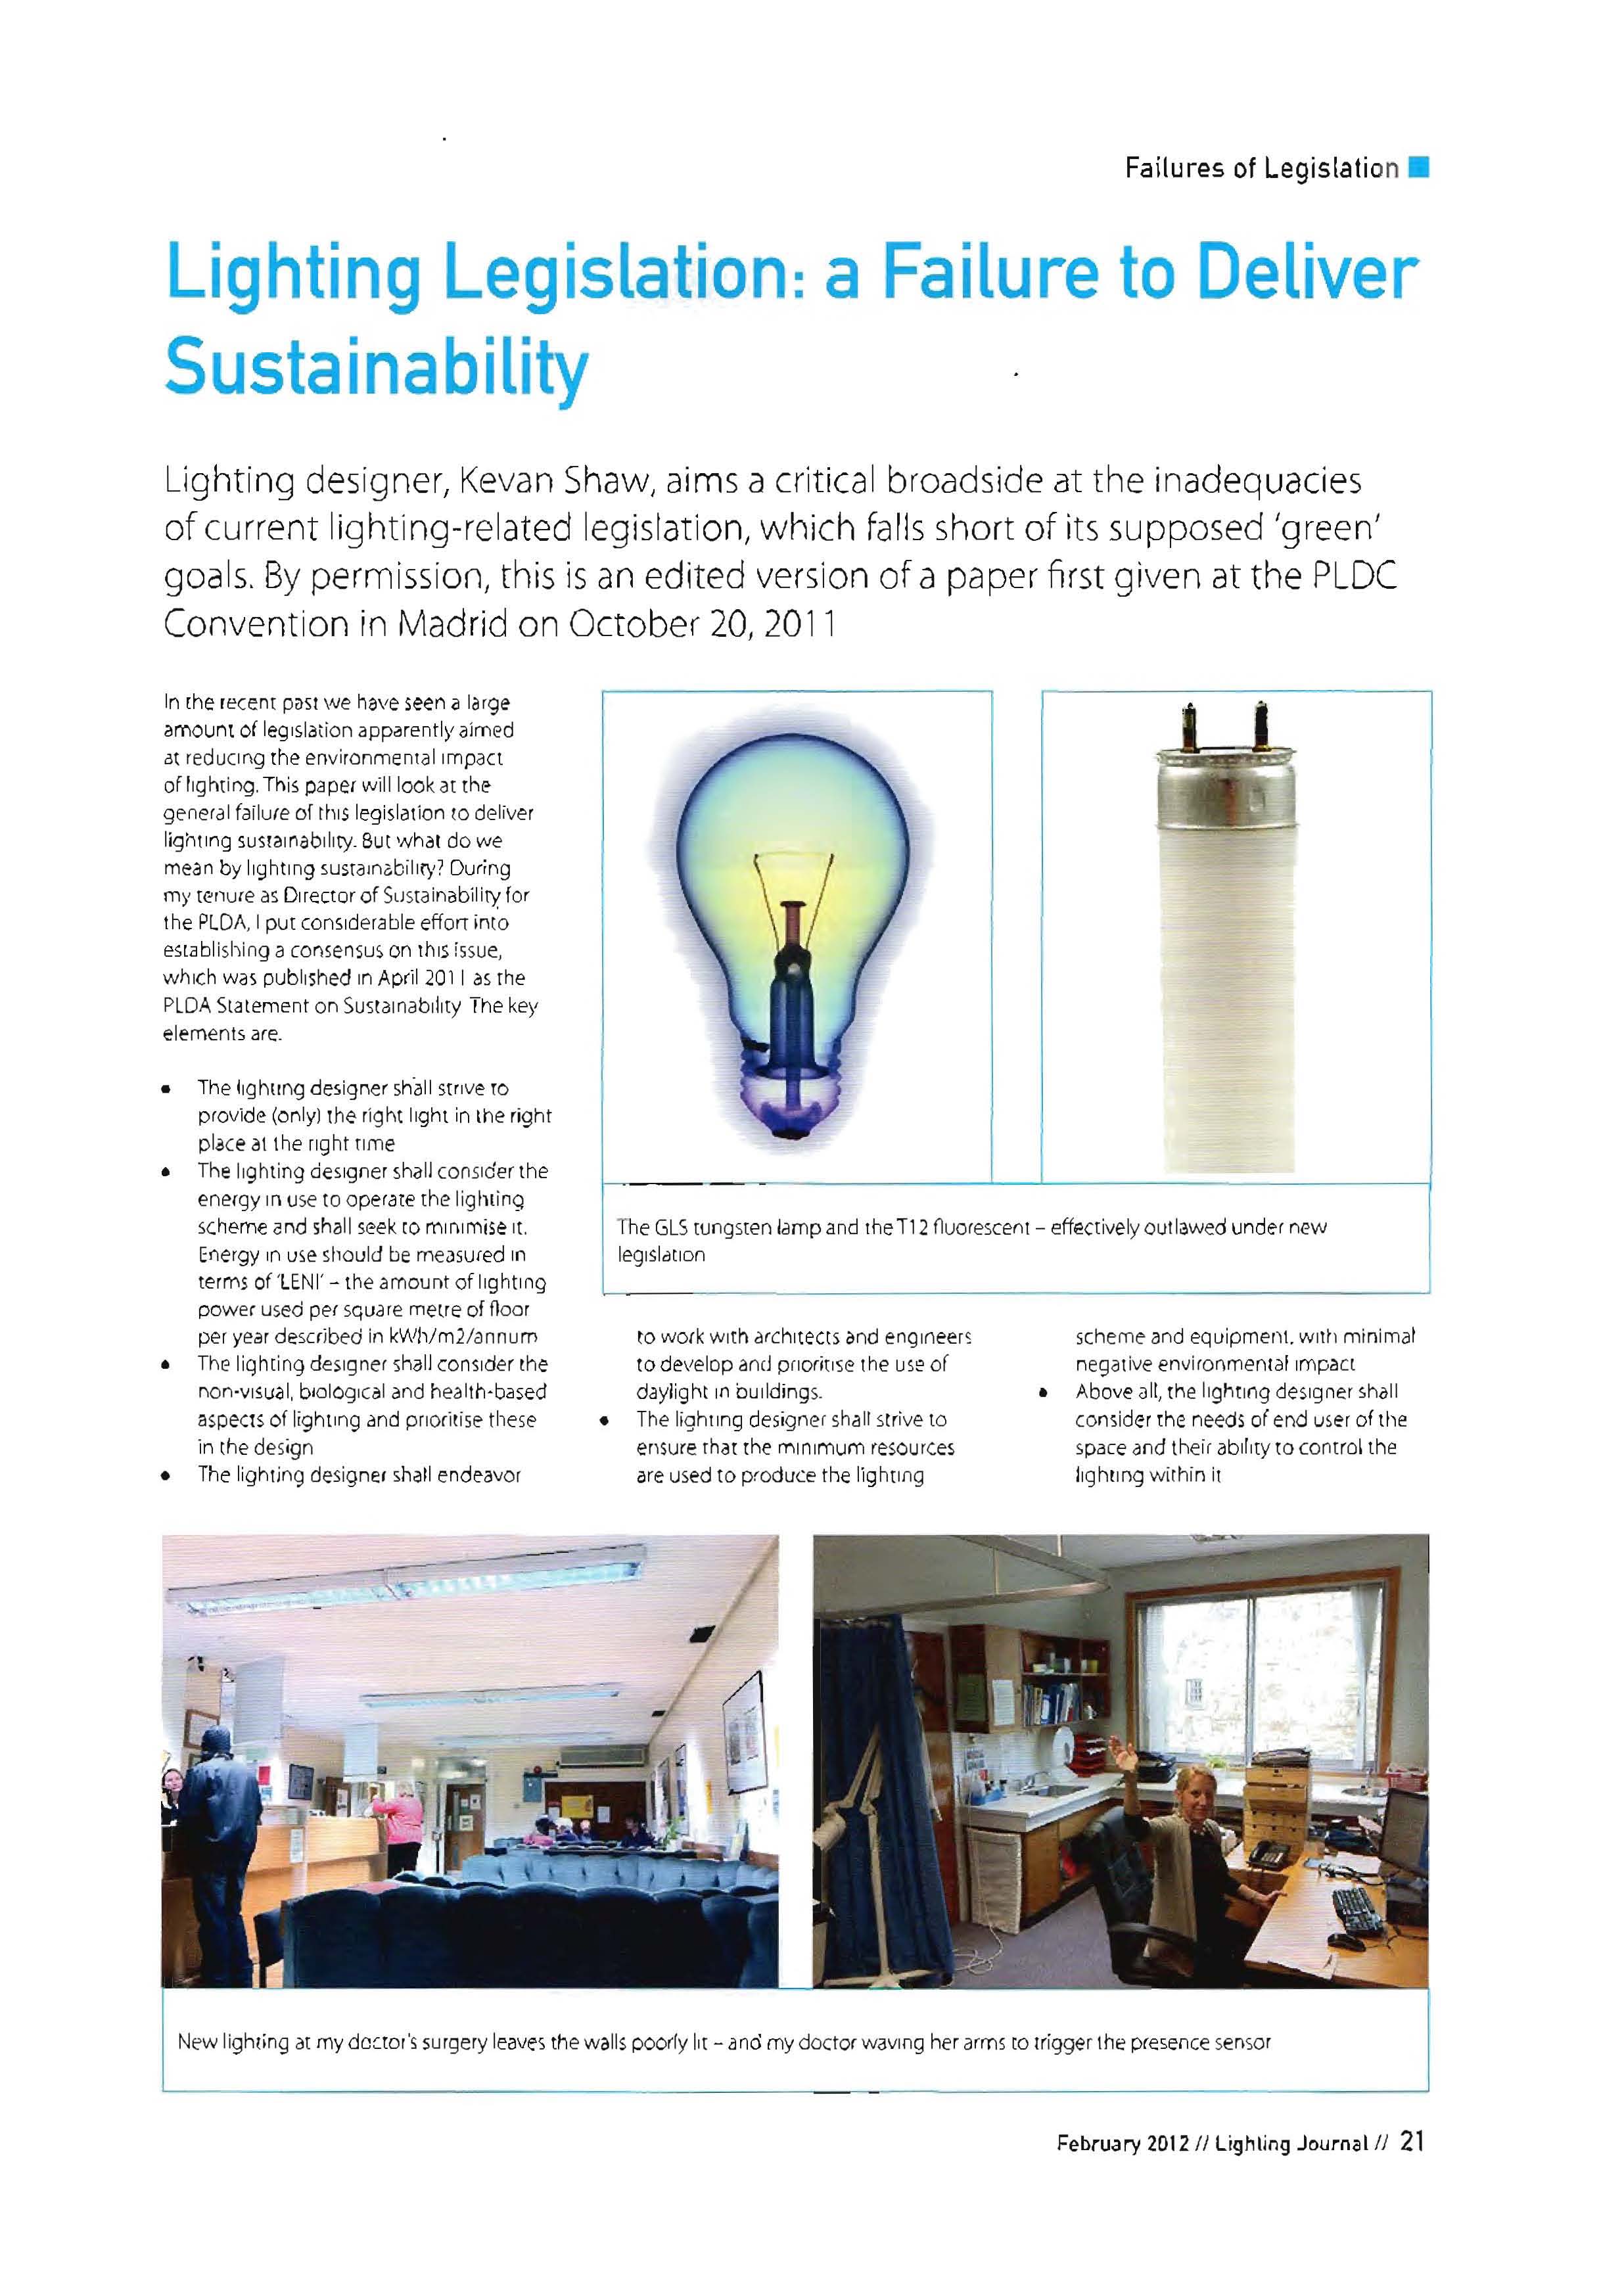 Lighting Legislation: A Failure to Deliver Sustainability